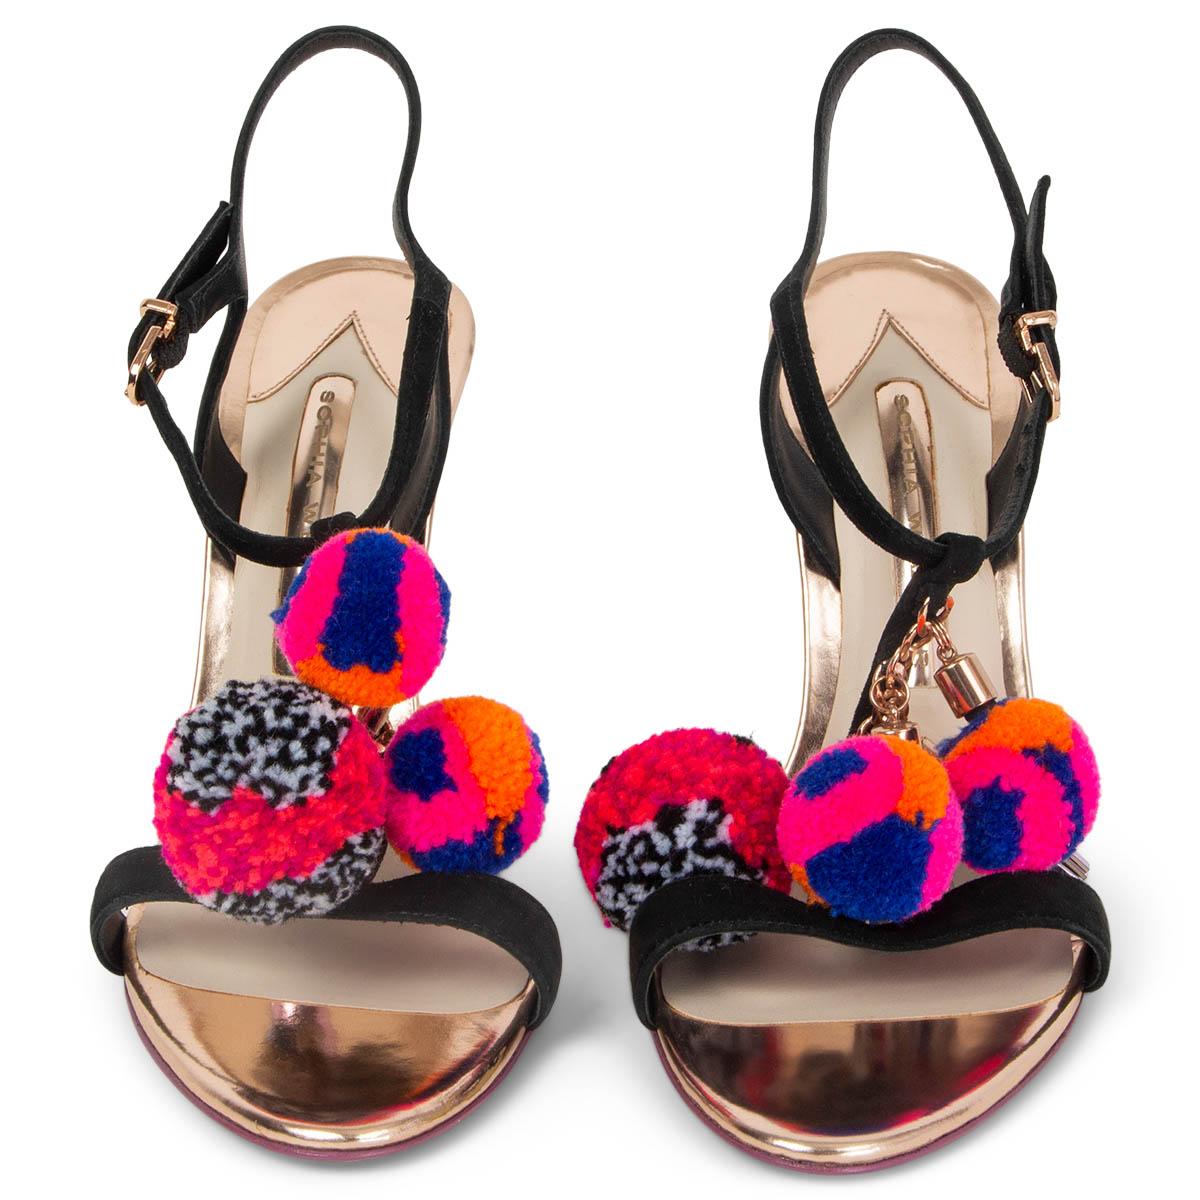 100% authentic Sophia Webster Layla Pom-Pom Tassel Sandals in black suede and metallic rose-gold leather. Embellished with pink, blue, orange and grey pom-poms and metallic tassels. They feature a metal stiletto heel.  Have been worn once and are in